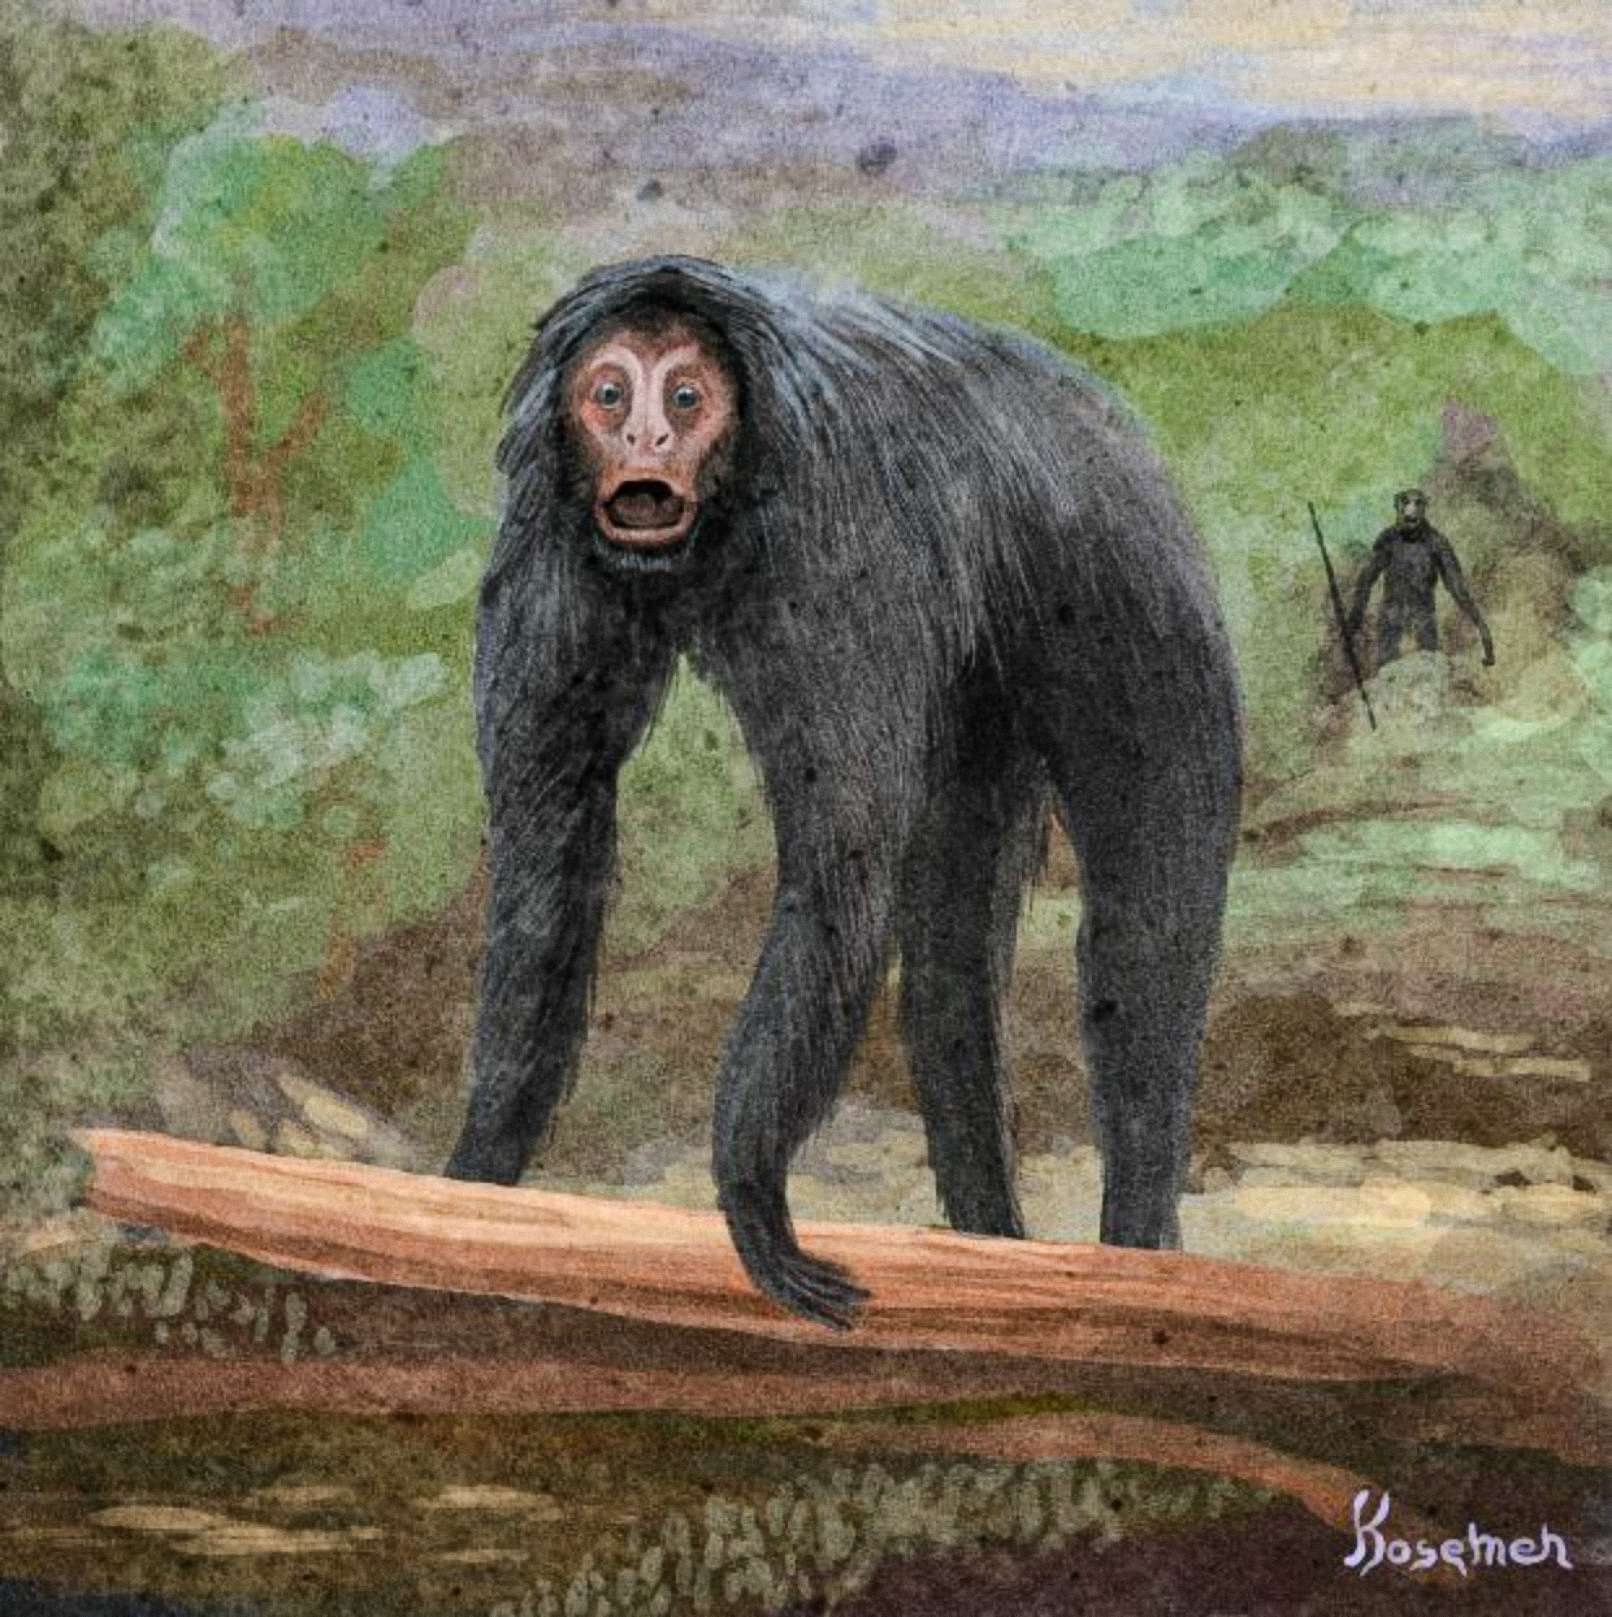 A Speculative Interpretation of the Event, the other primate depicted at the back with holding a Tool (art by Kosemen)